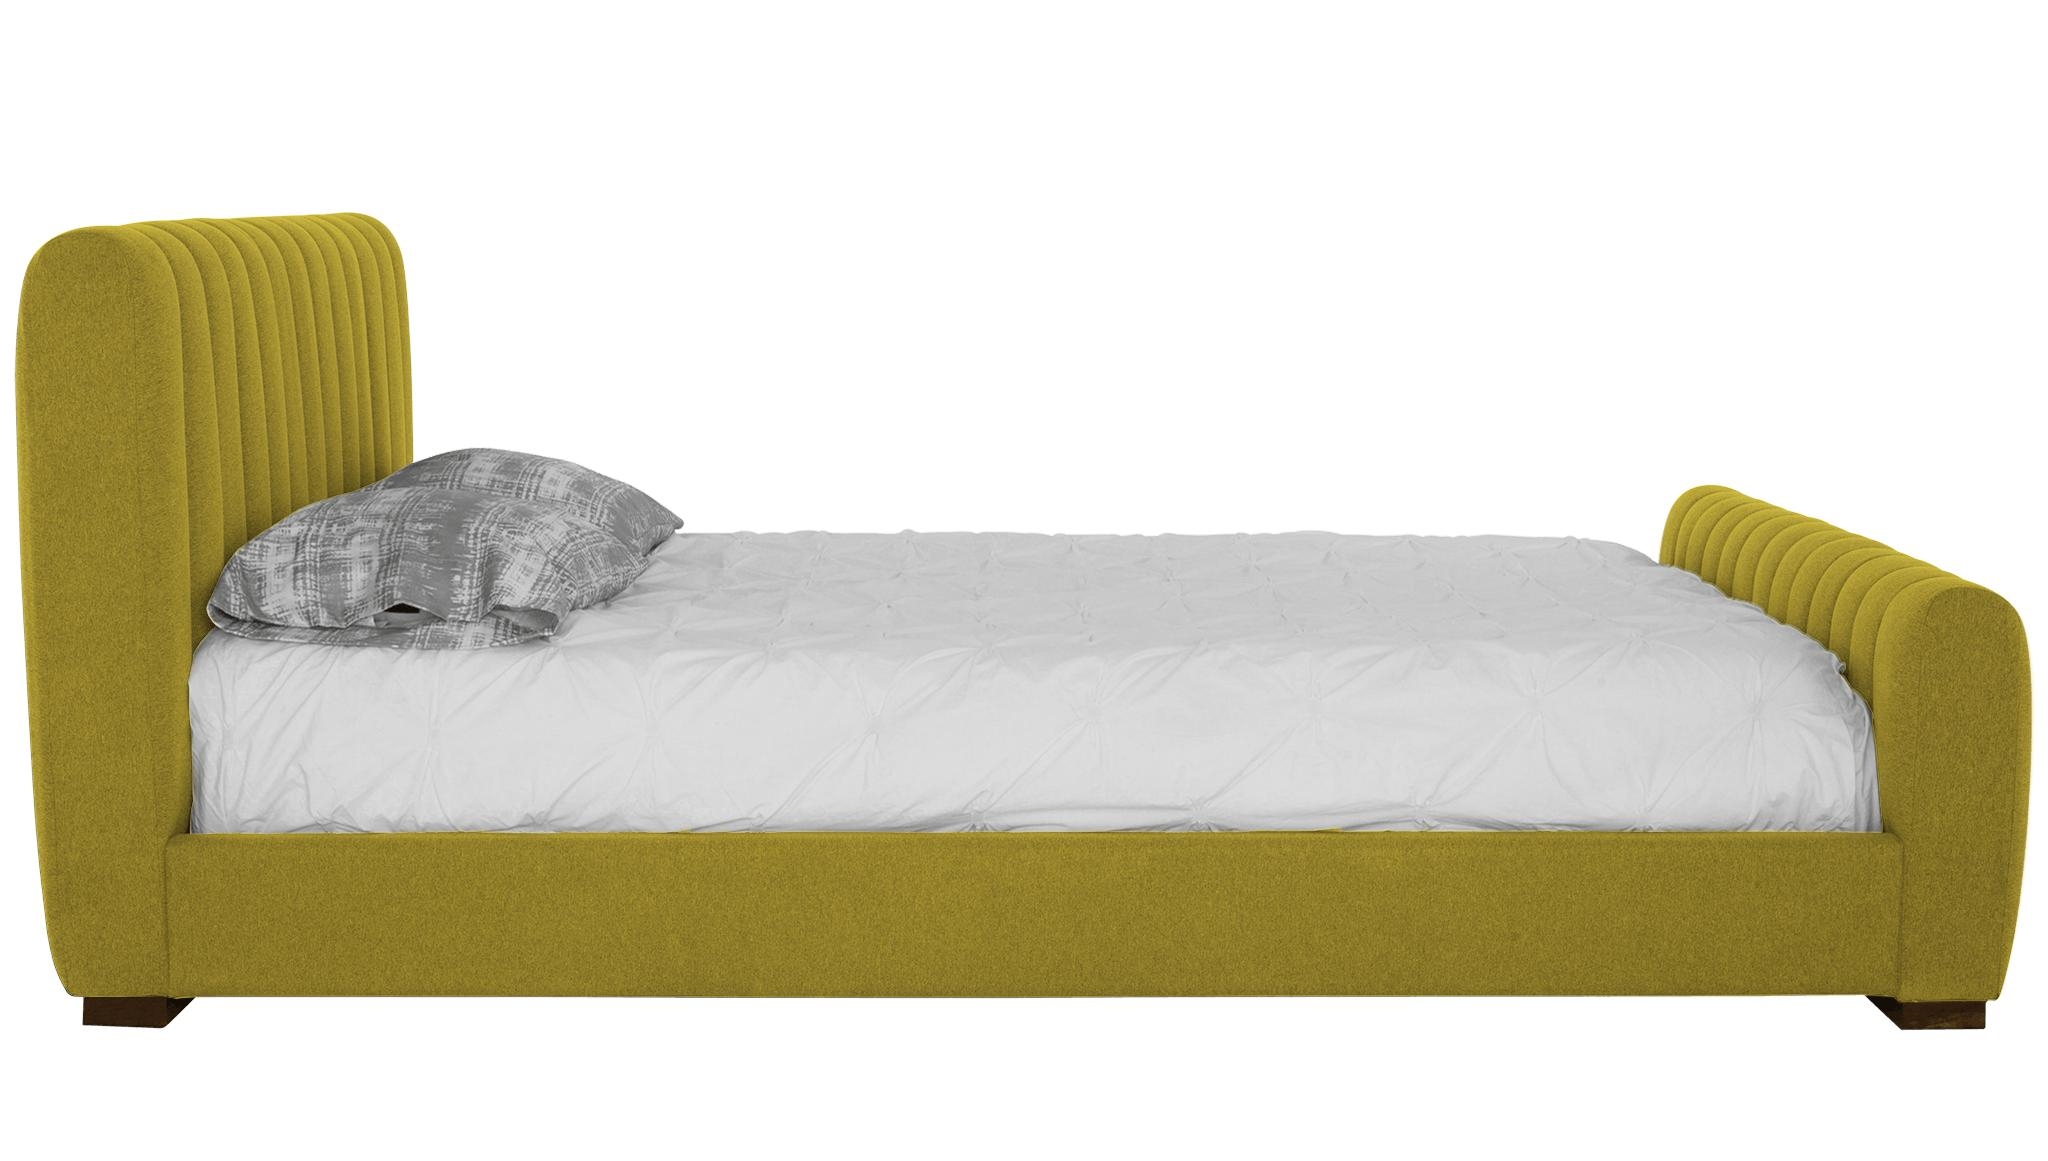 Yellow Camille Mid Century Modern Bed - Bloke Goldenrod - Mocha - Queen - Image 2